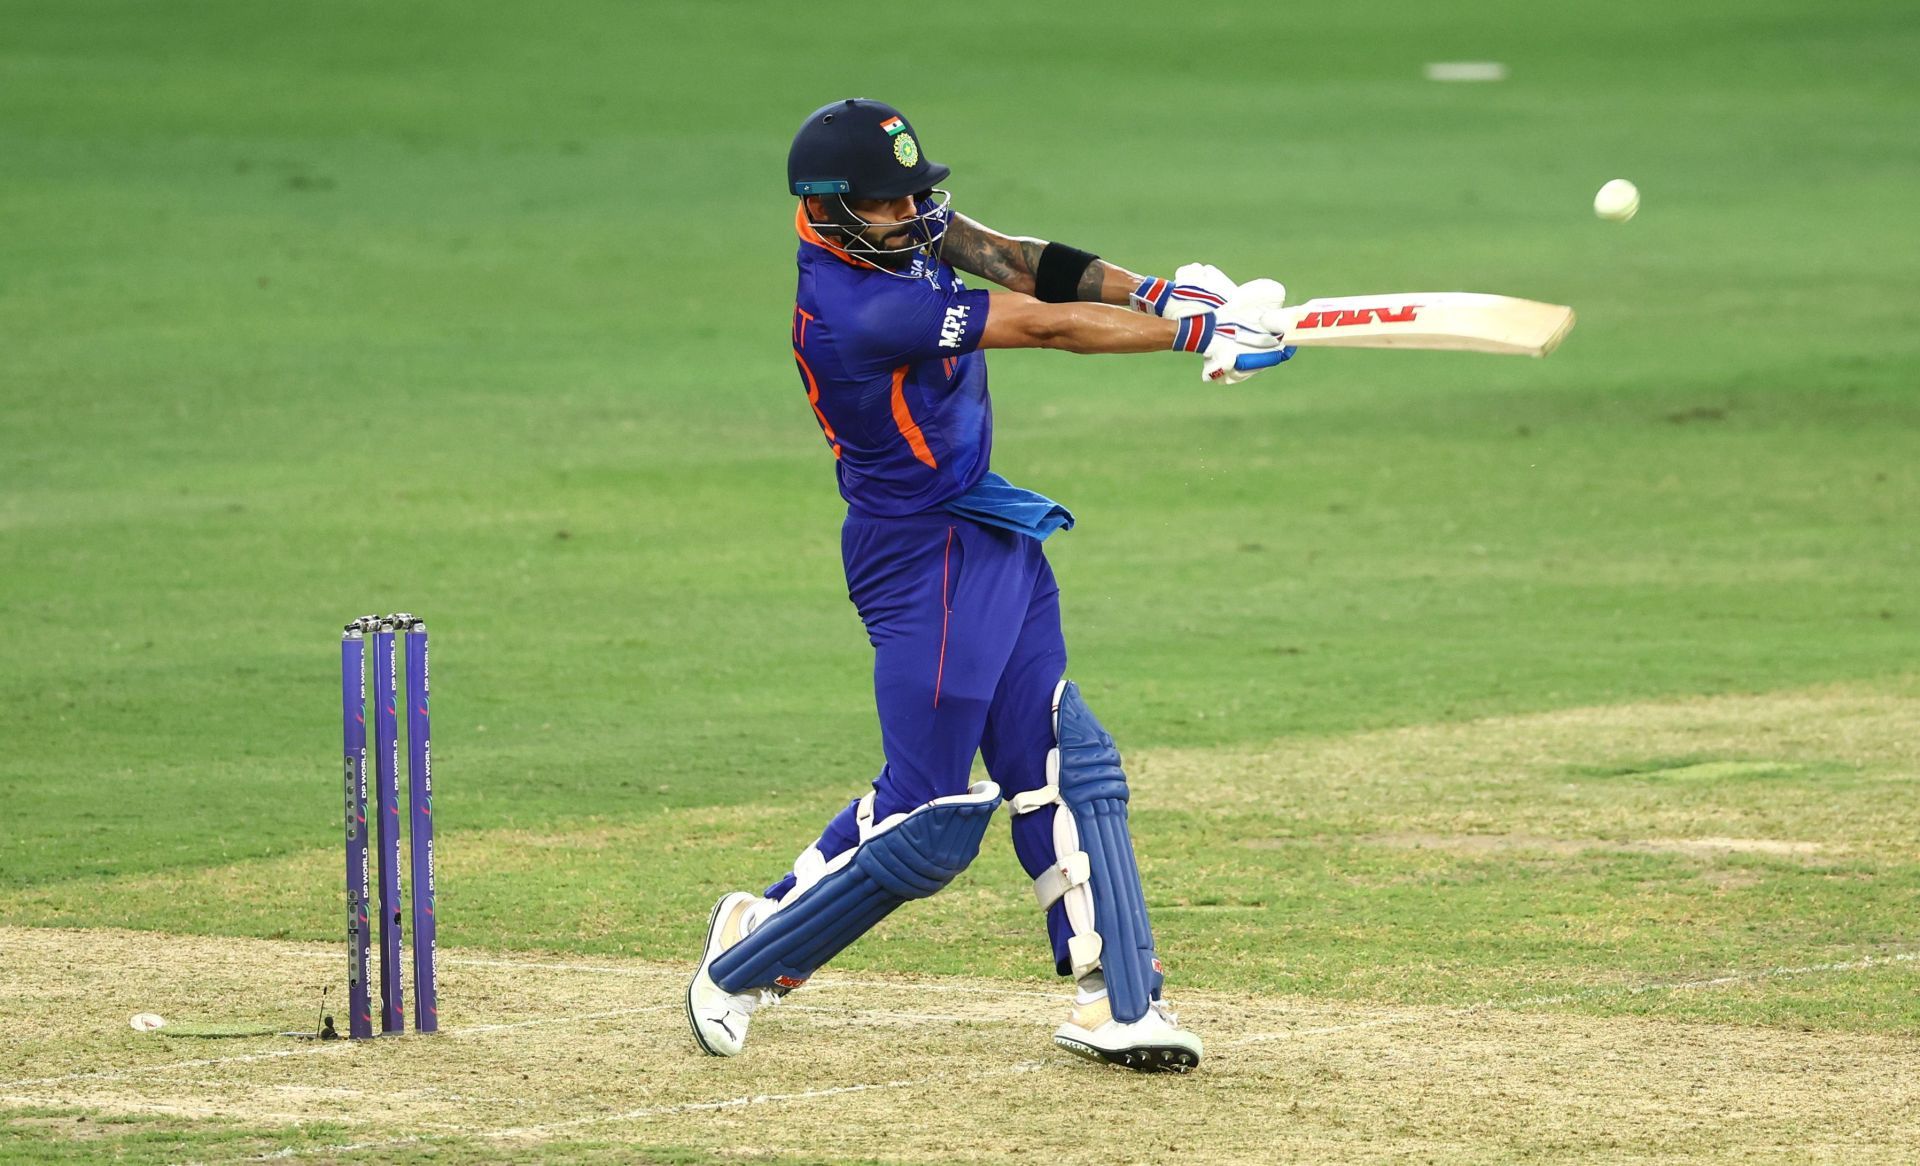 Virat Kohli scored 276 runs in five matches in the Asia Cup. Pic: Getty Images